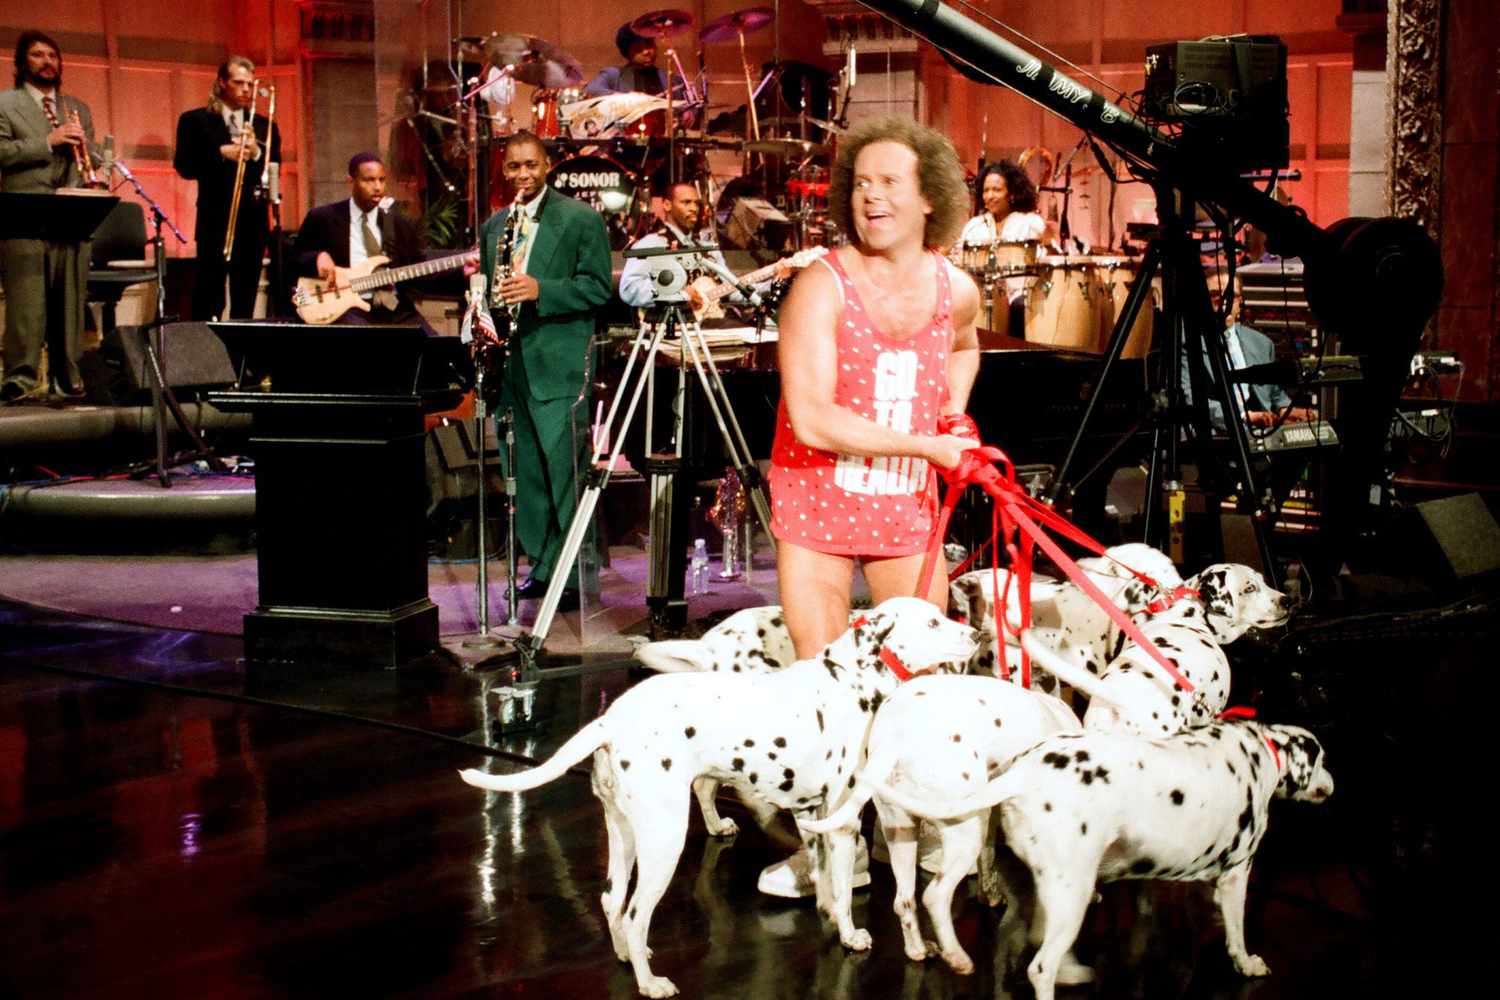 Richard Simmons on The Tonight Show With Jay Leno on July 29, 1994